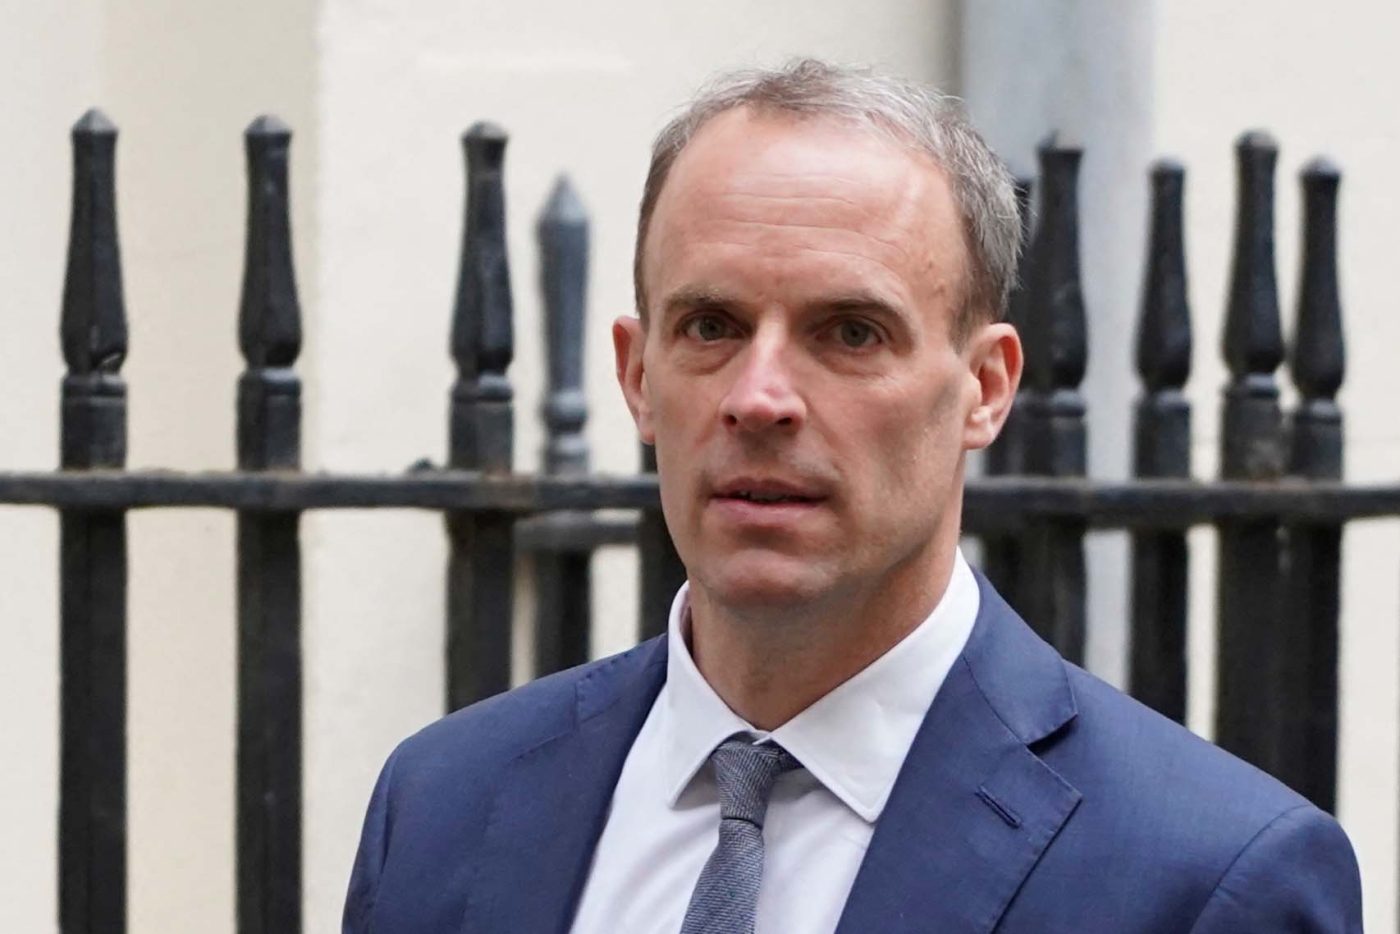 UK foreign minister Dominic Raab met with Saudi Crown Prince Mohammed bin Salman on Monday.